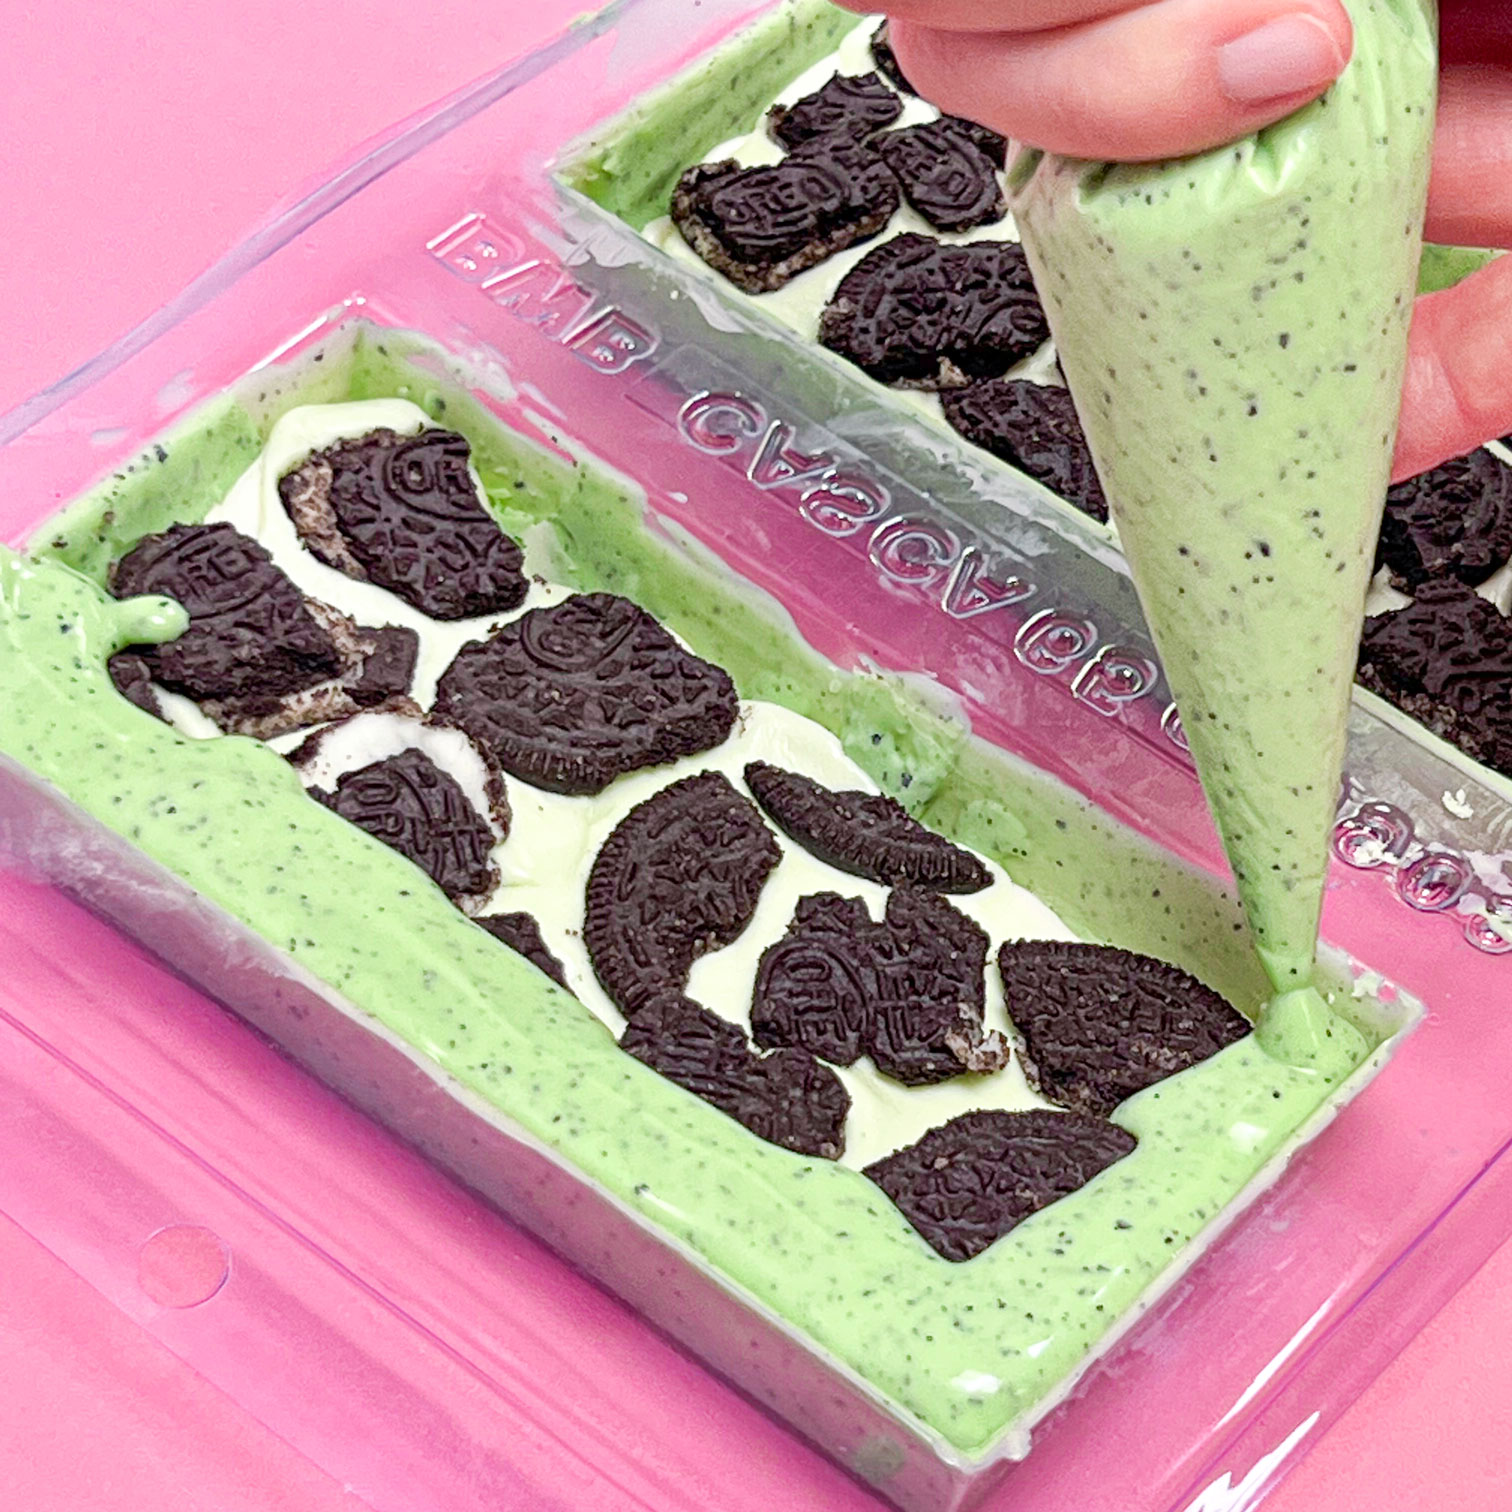 piping melted mint chocolate to cover candy filling